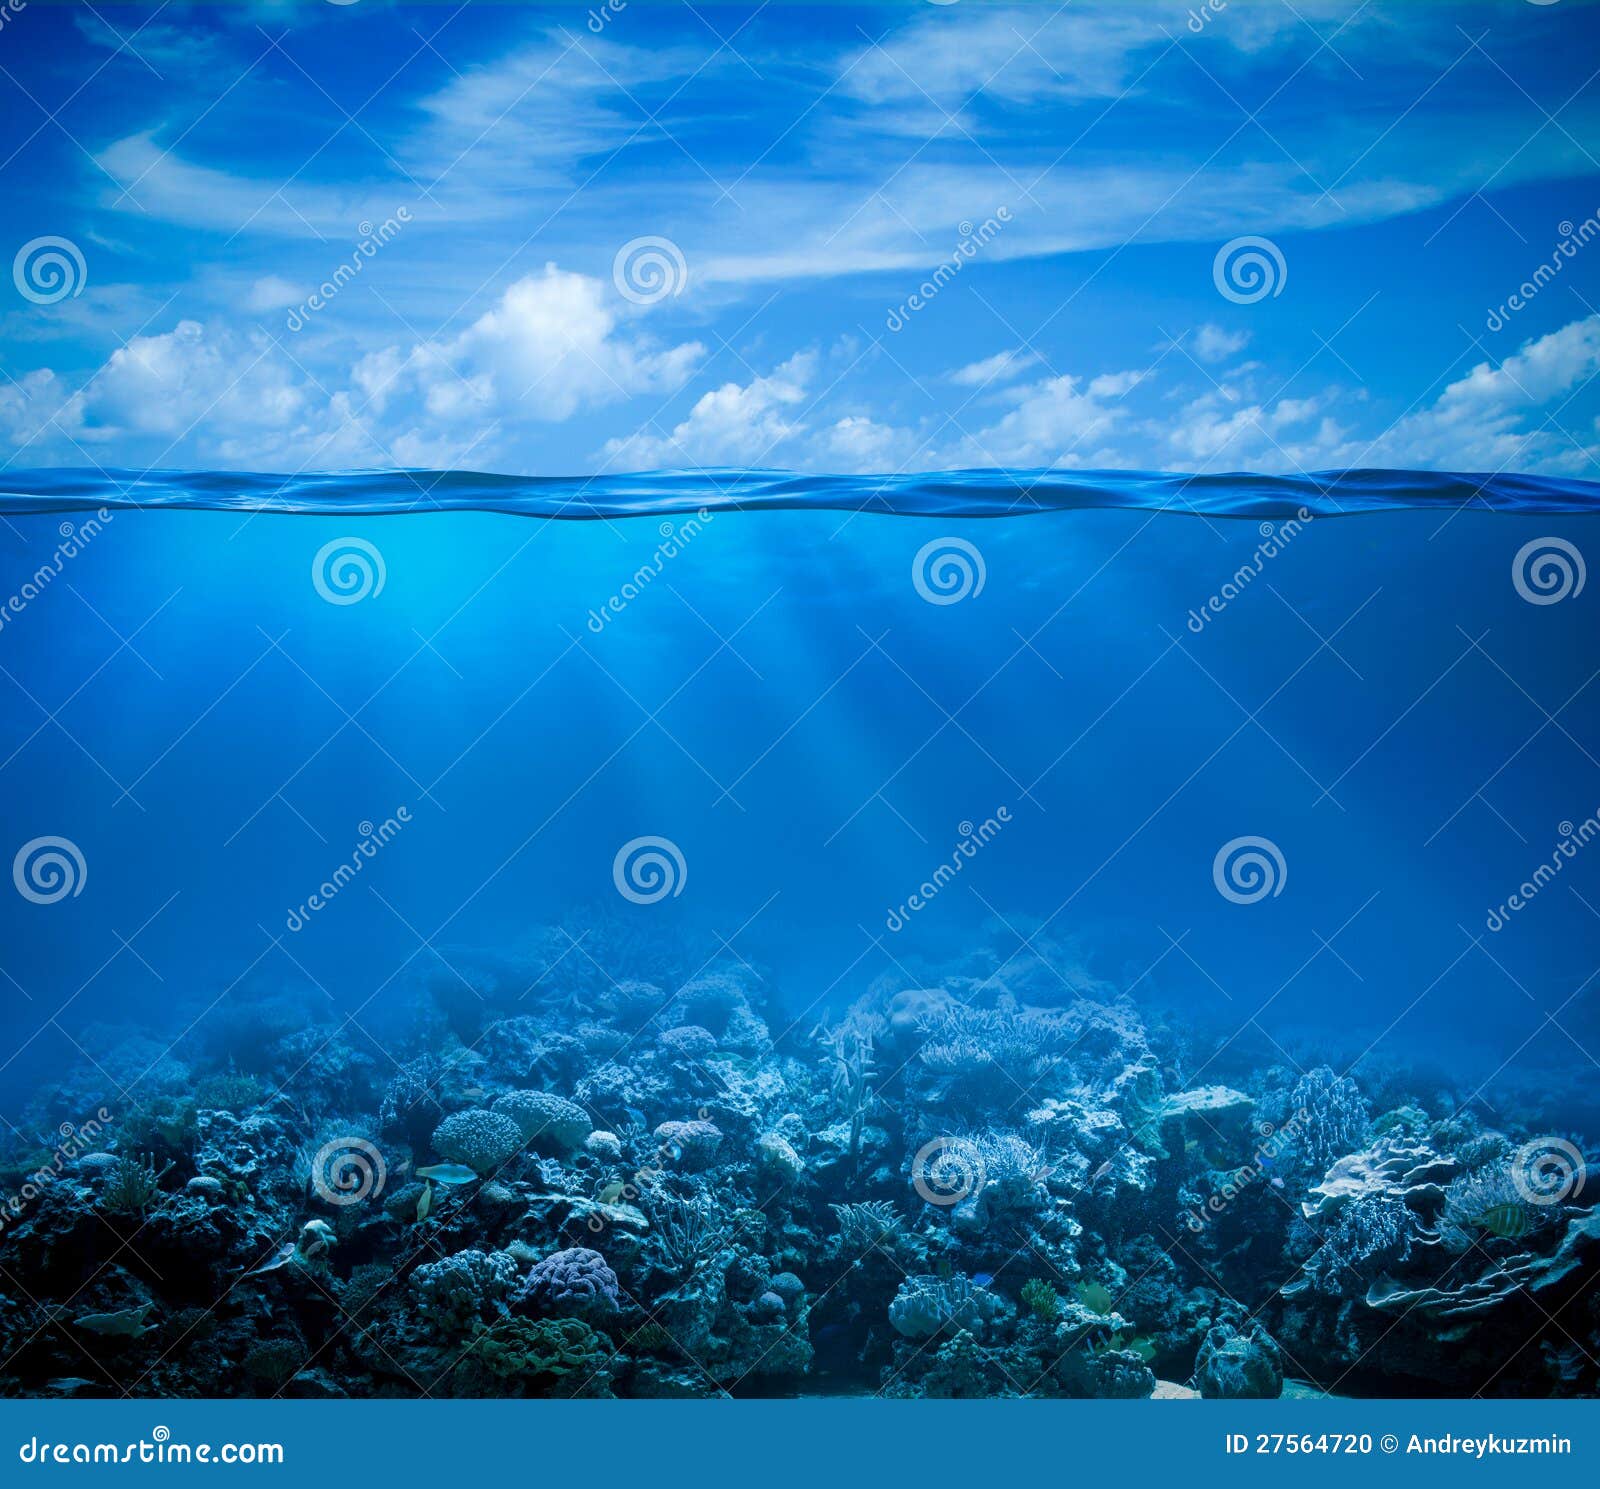 underwater with horizon and water surface